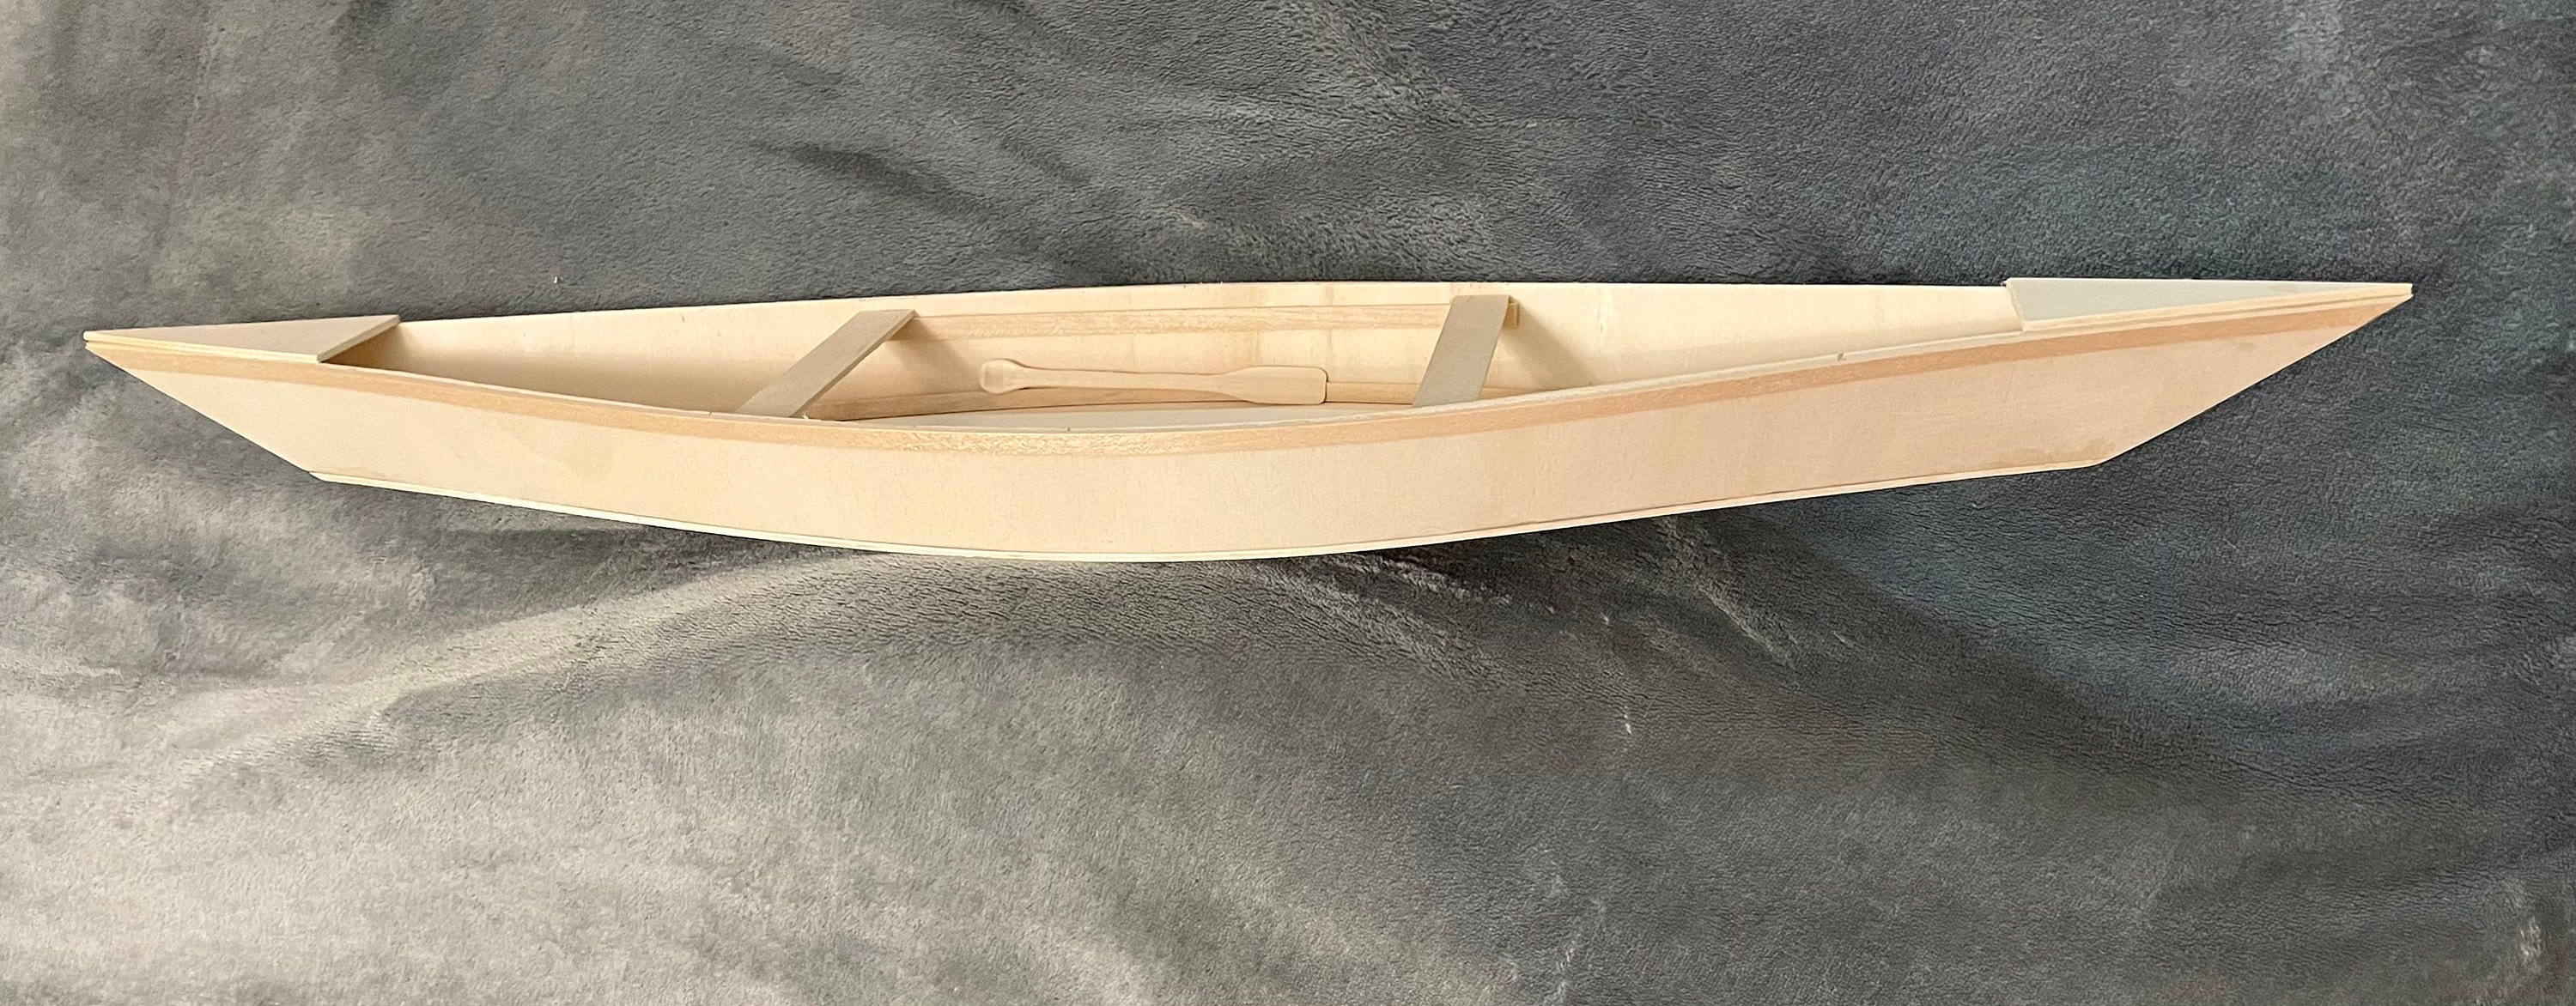 Pirogue Boat Wooden Models Hand Crafted